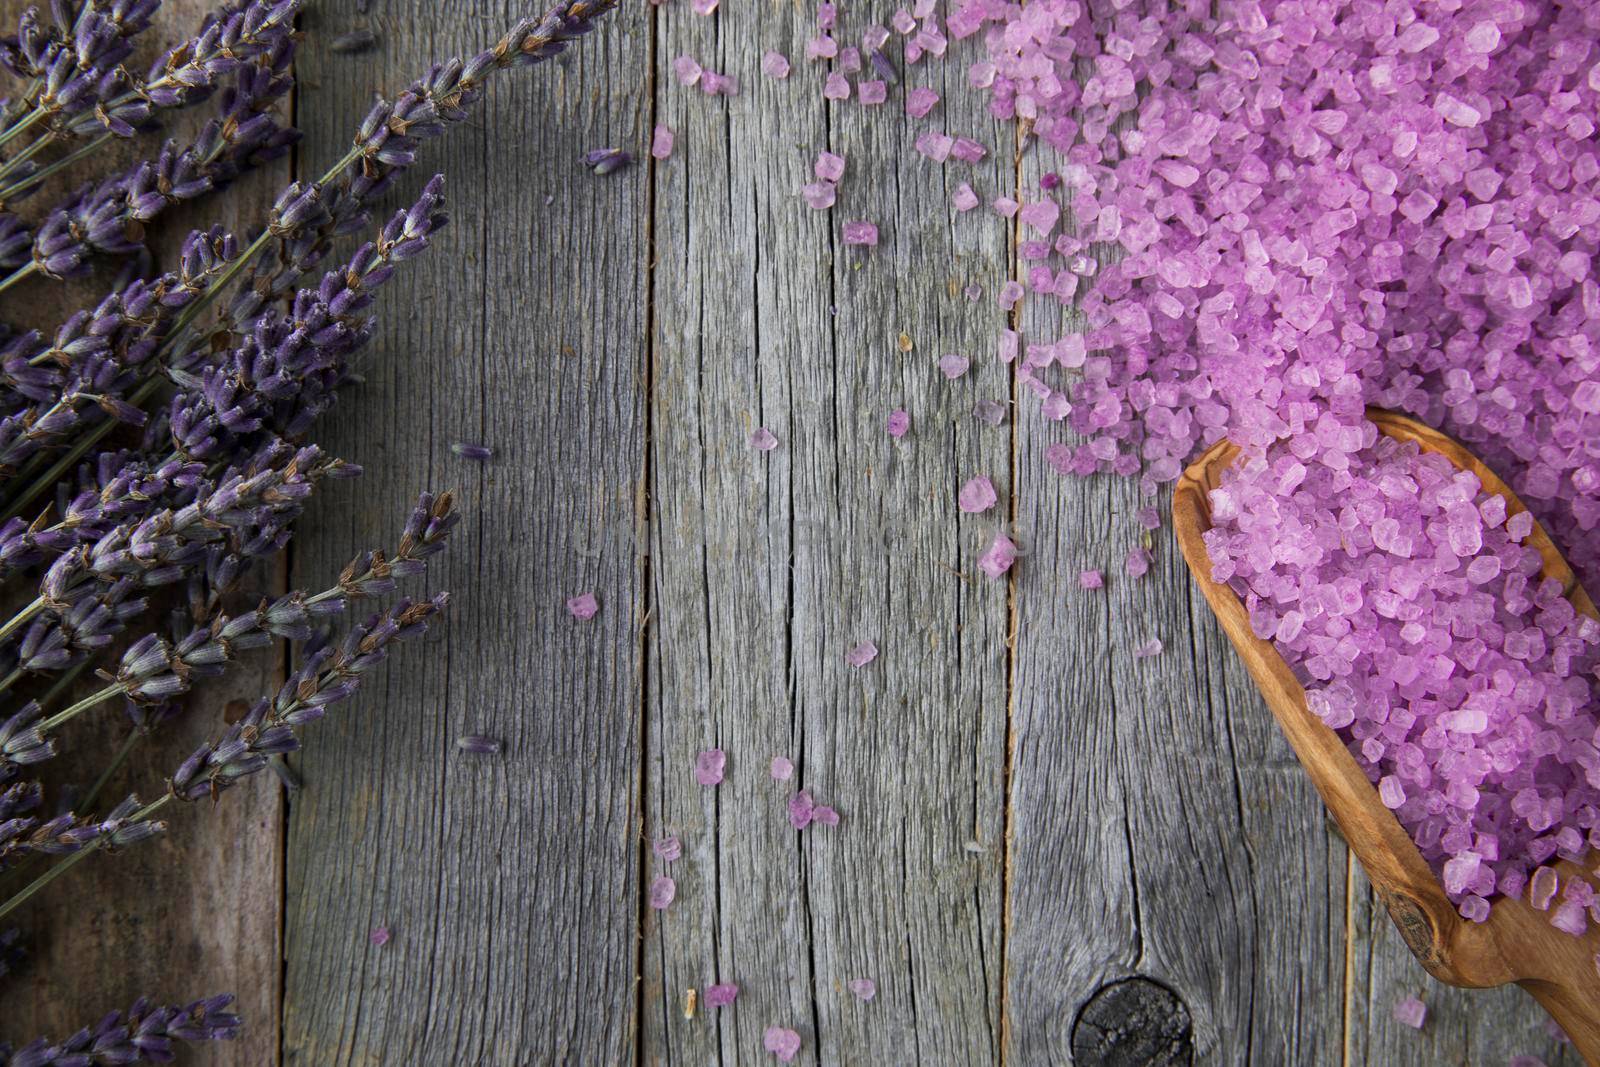 Purple bath salts with wooden scoop on wooden surface with copy space